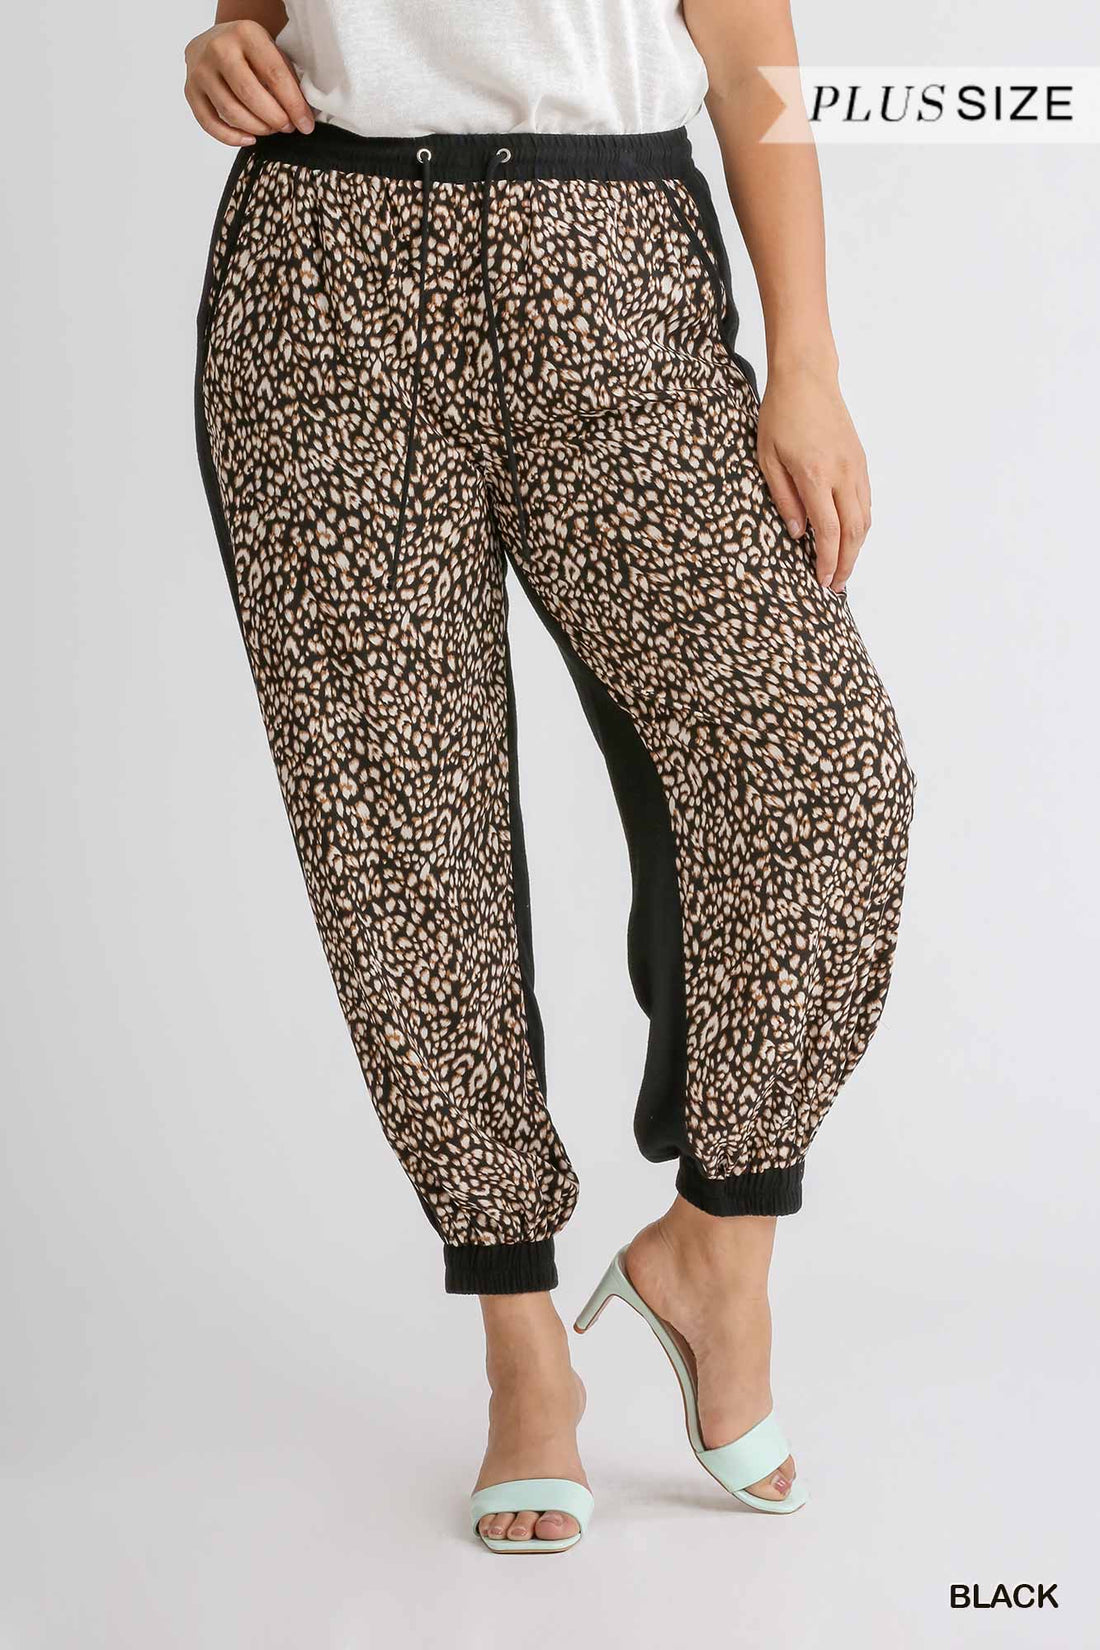 Women’s Linen Blend Animal Print Jogger Pants with an Elastic Waistband, Drawstring, and Pockets